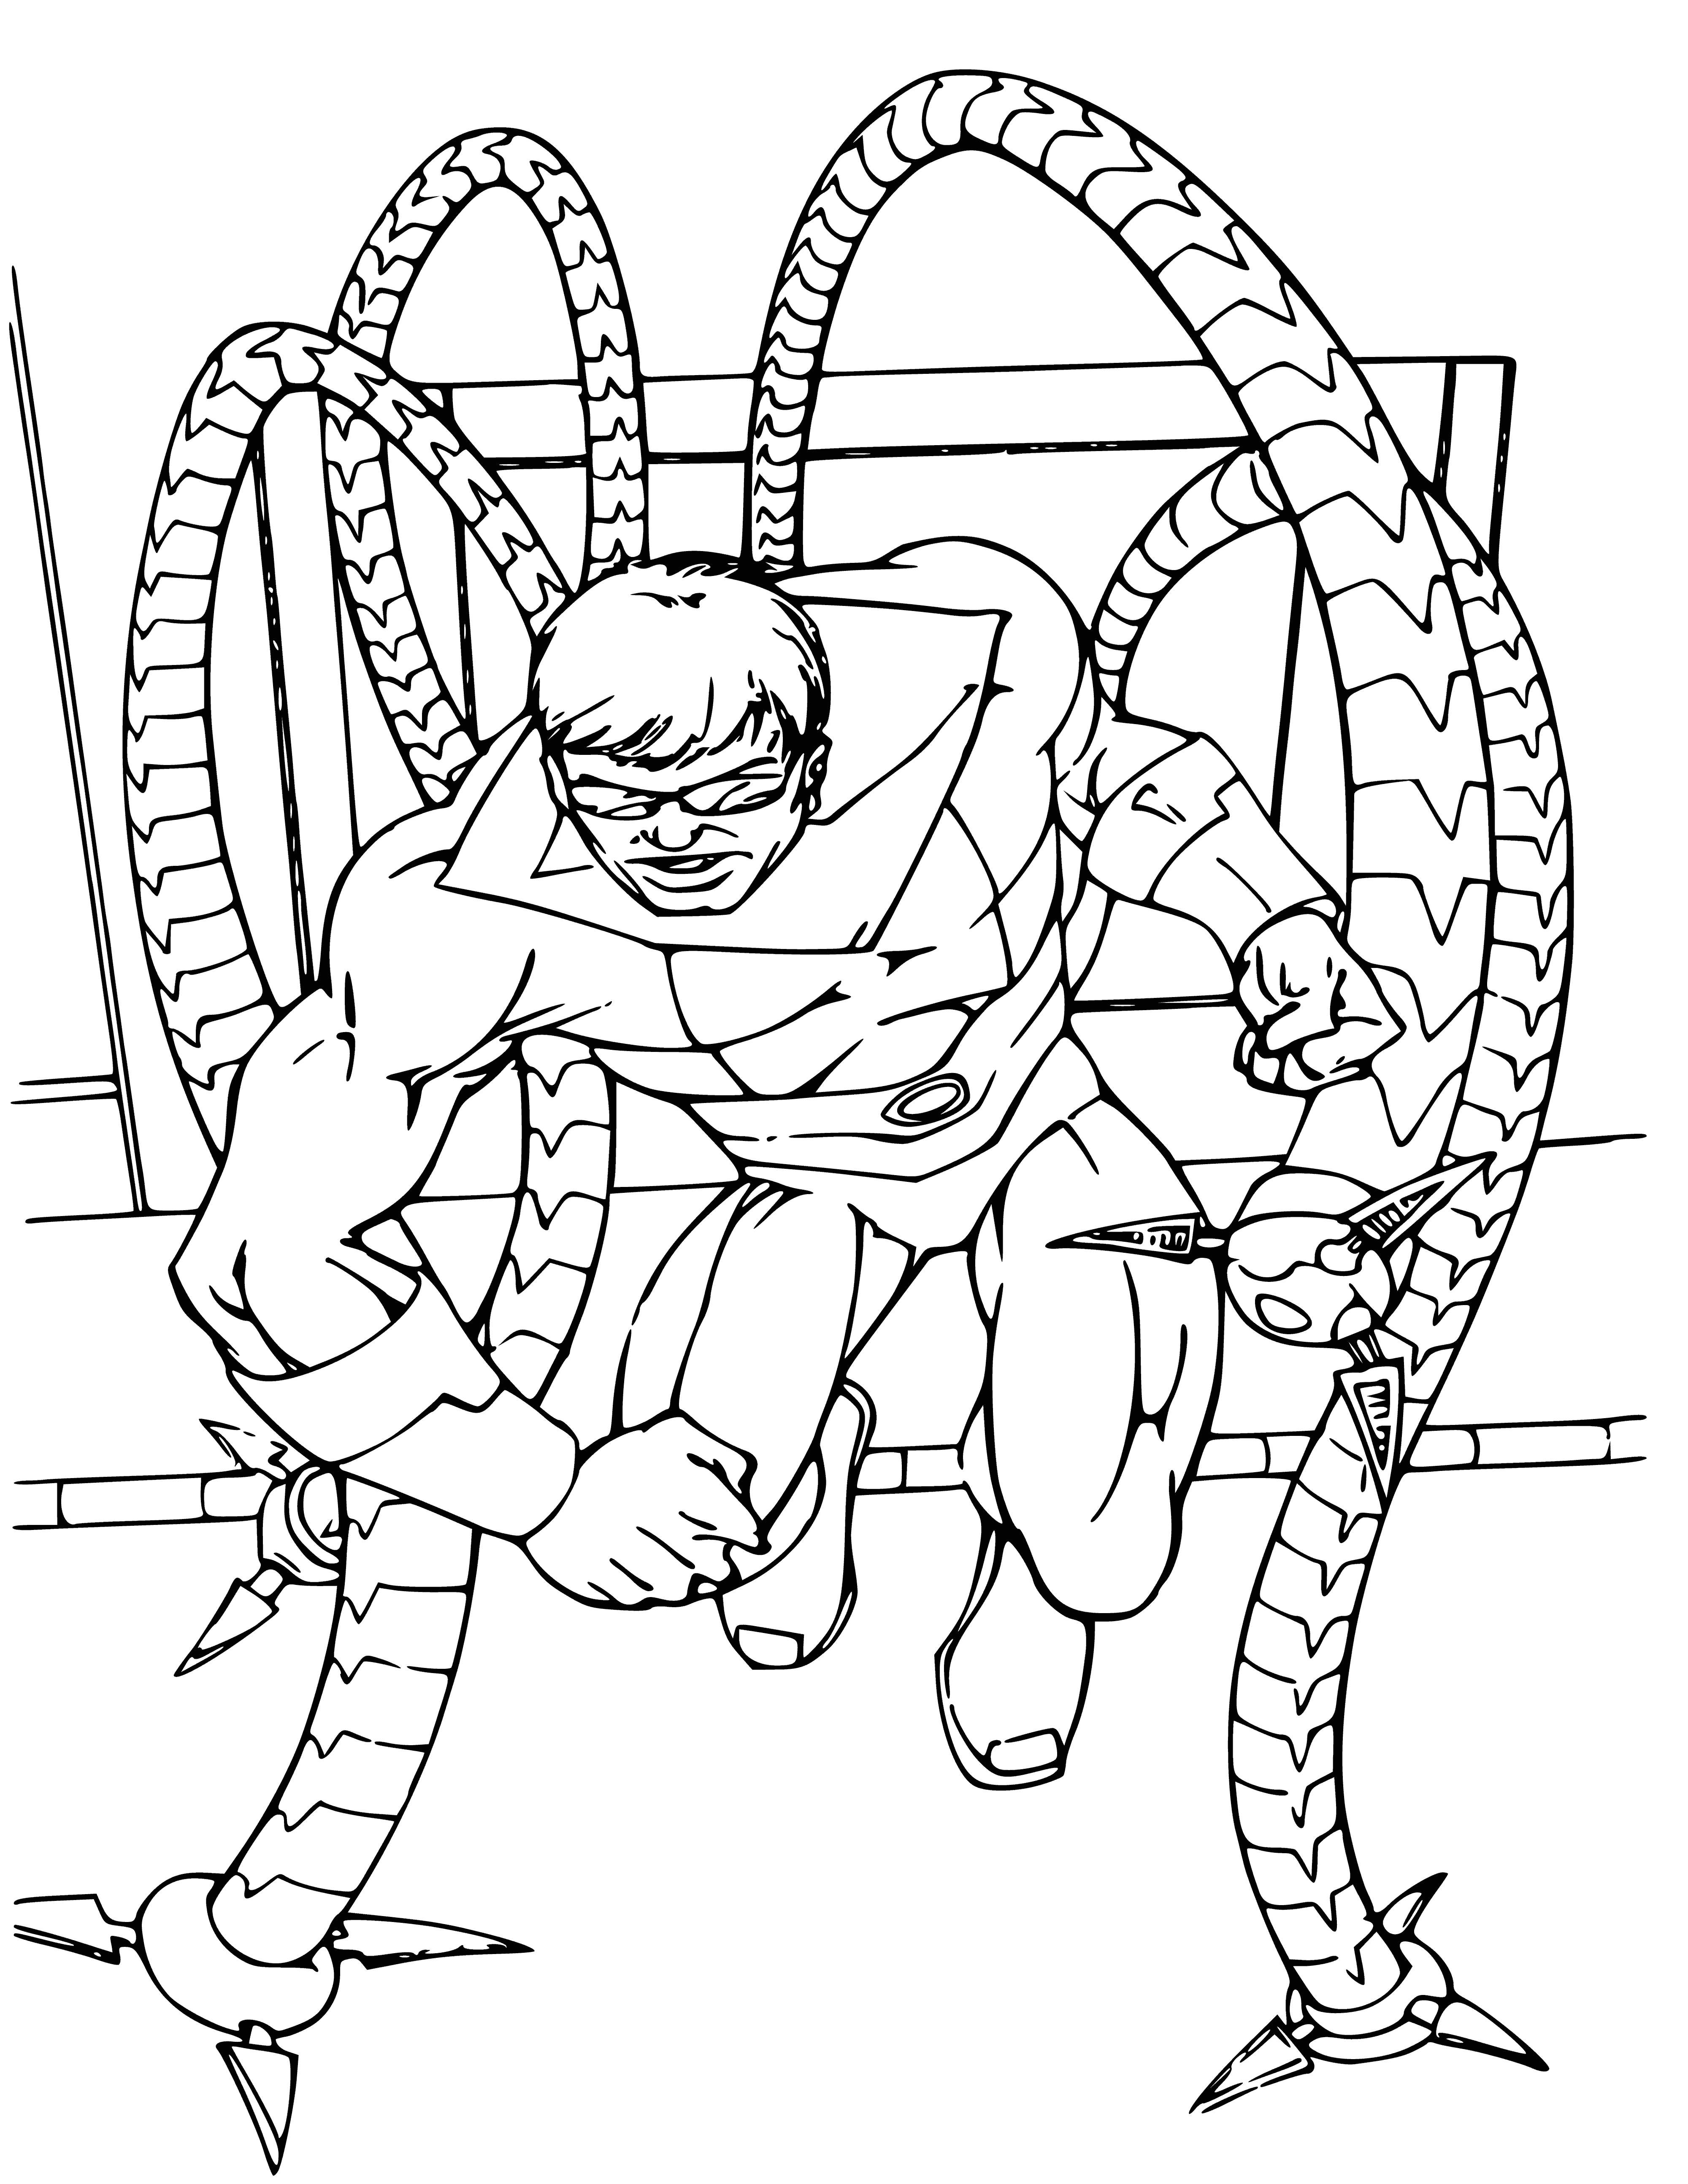 Dr. Octopus coloring page